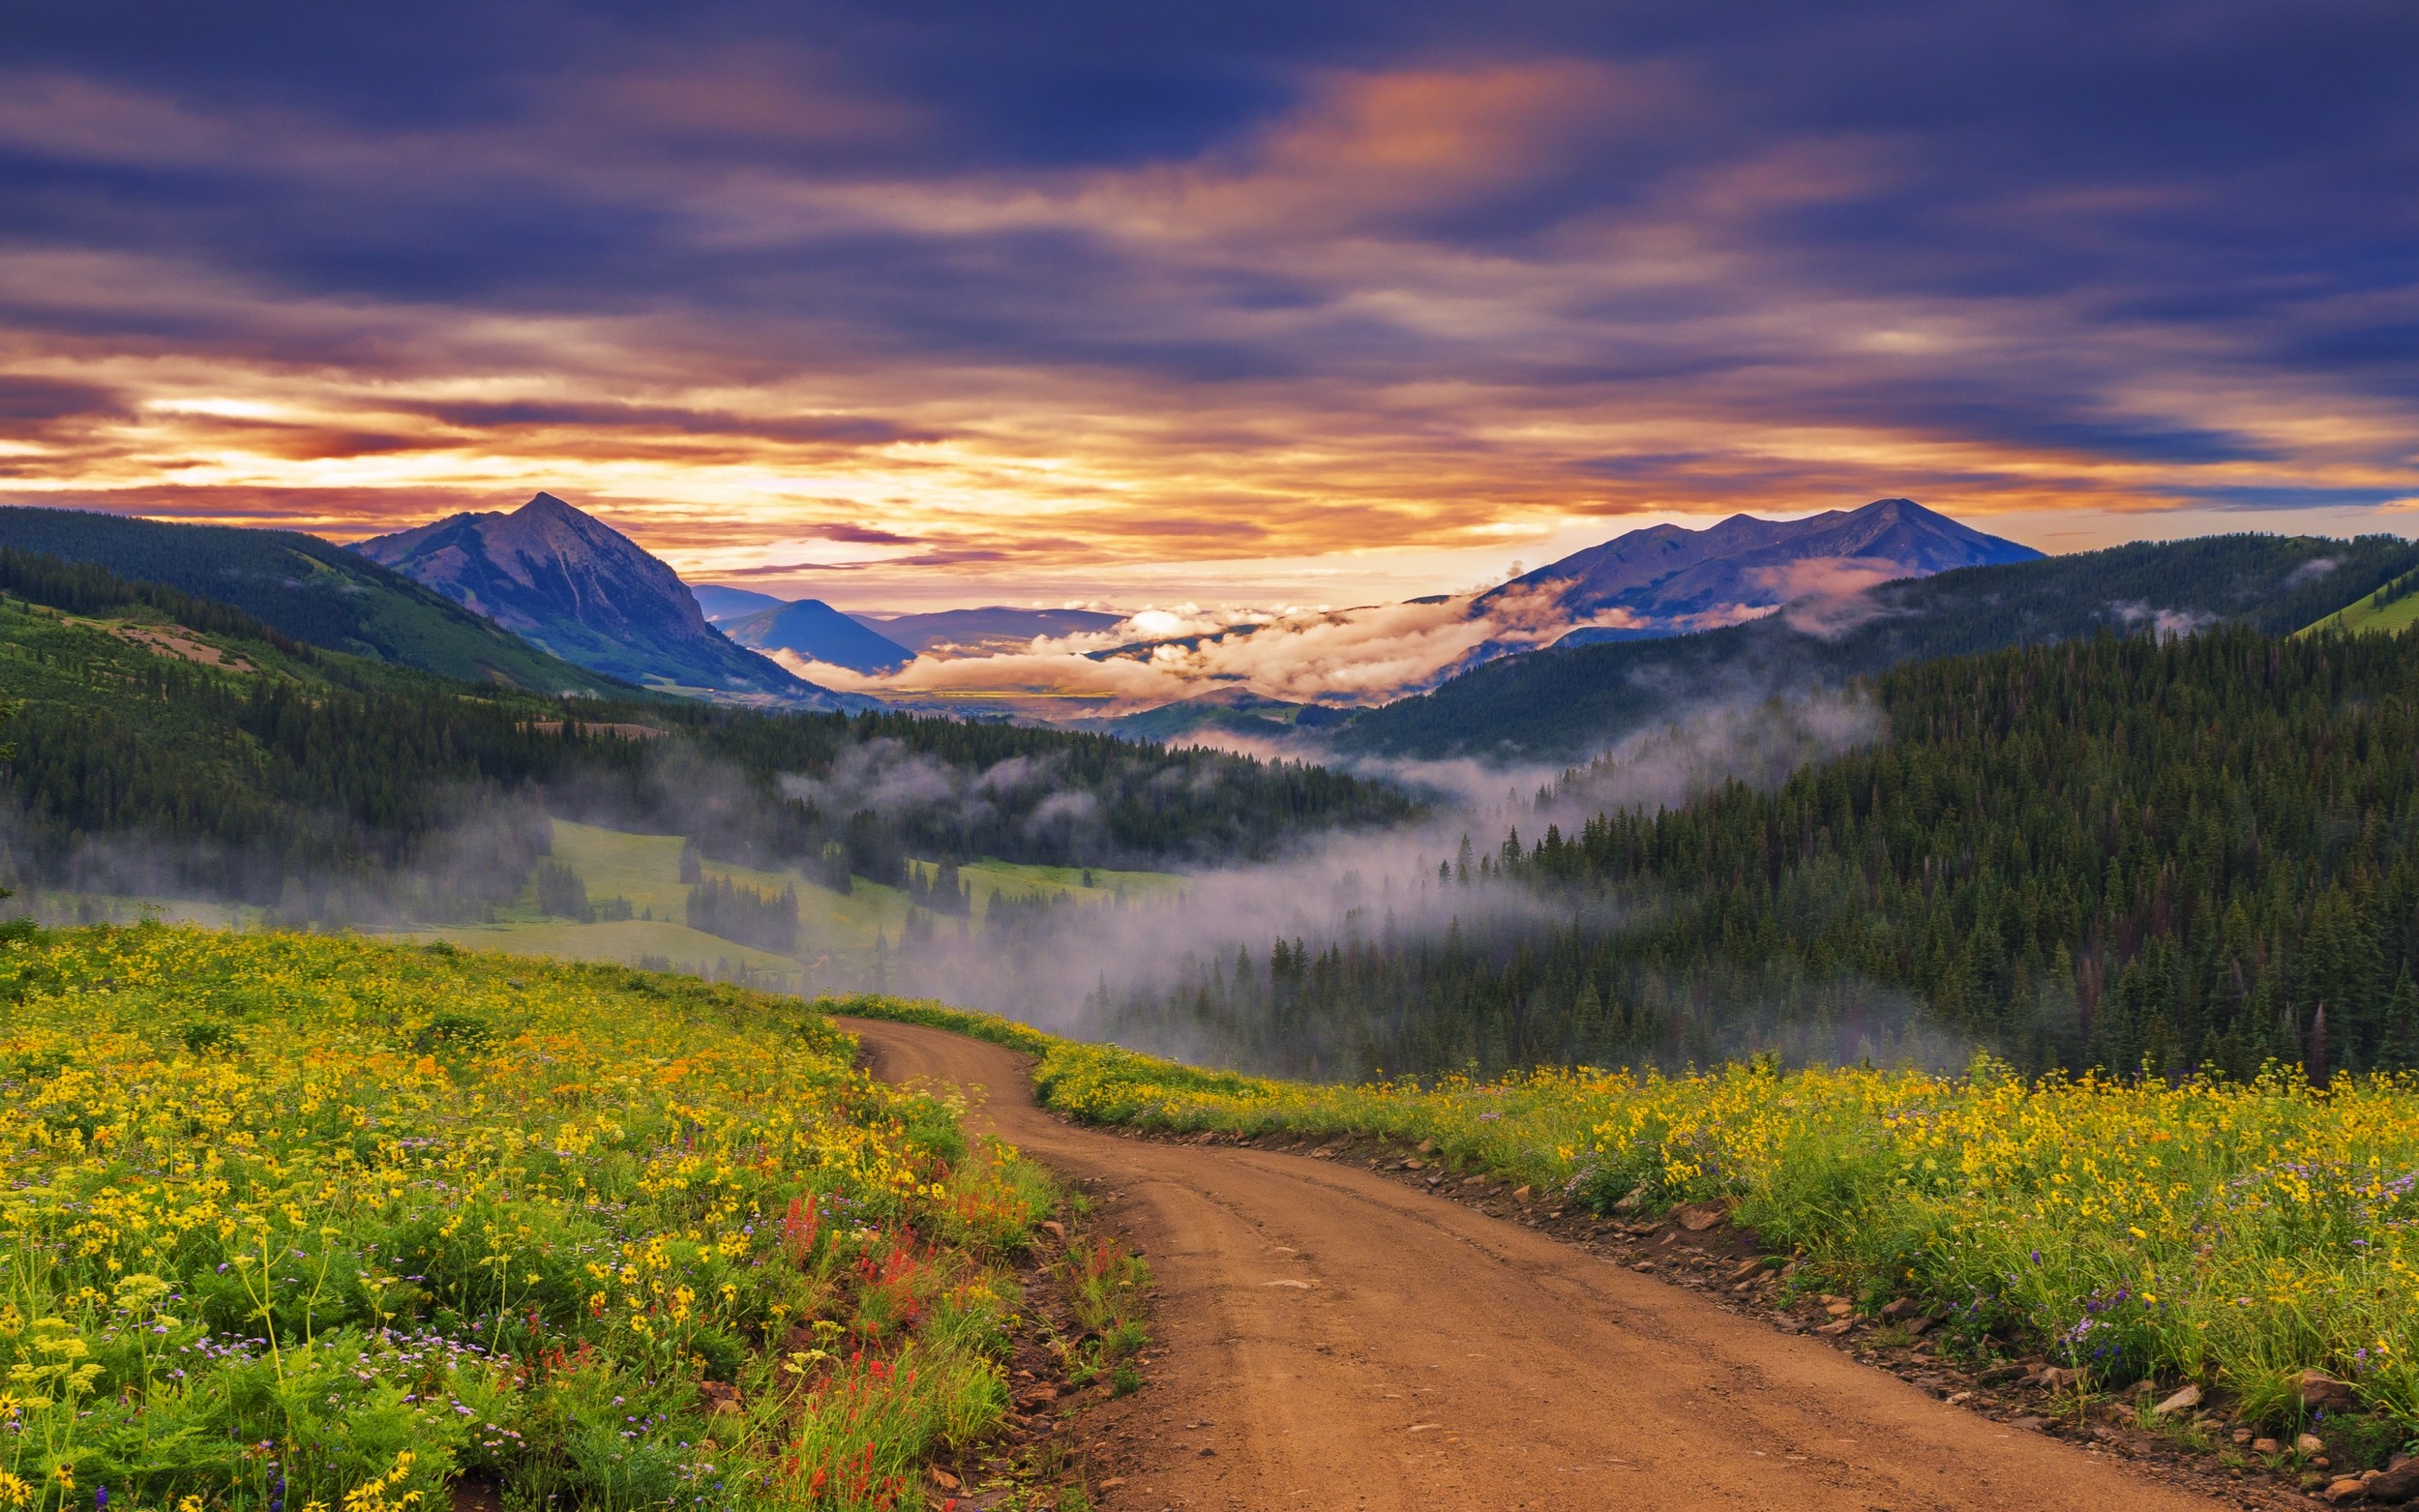 General 2500x1563 nature landscape sunset wildflowers valley forest mountains clouds mist dirt road path sky flowers